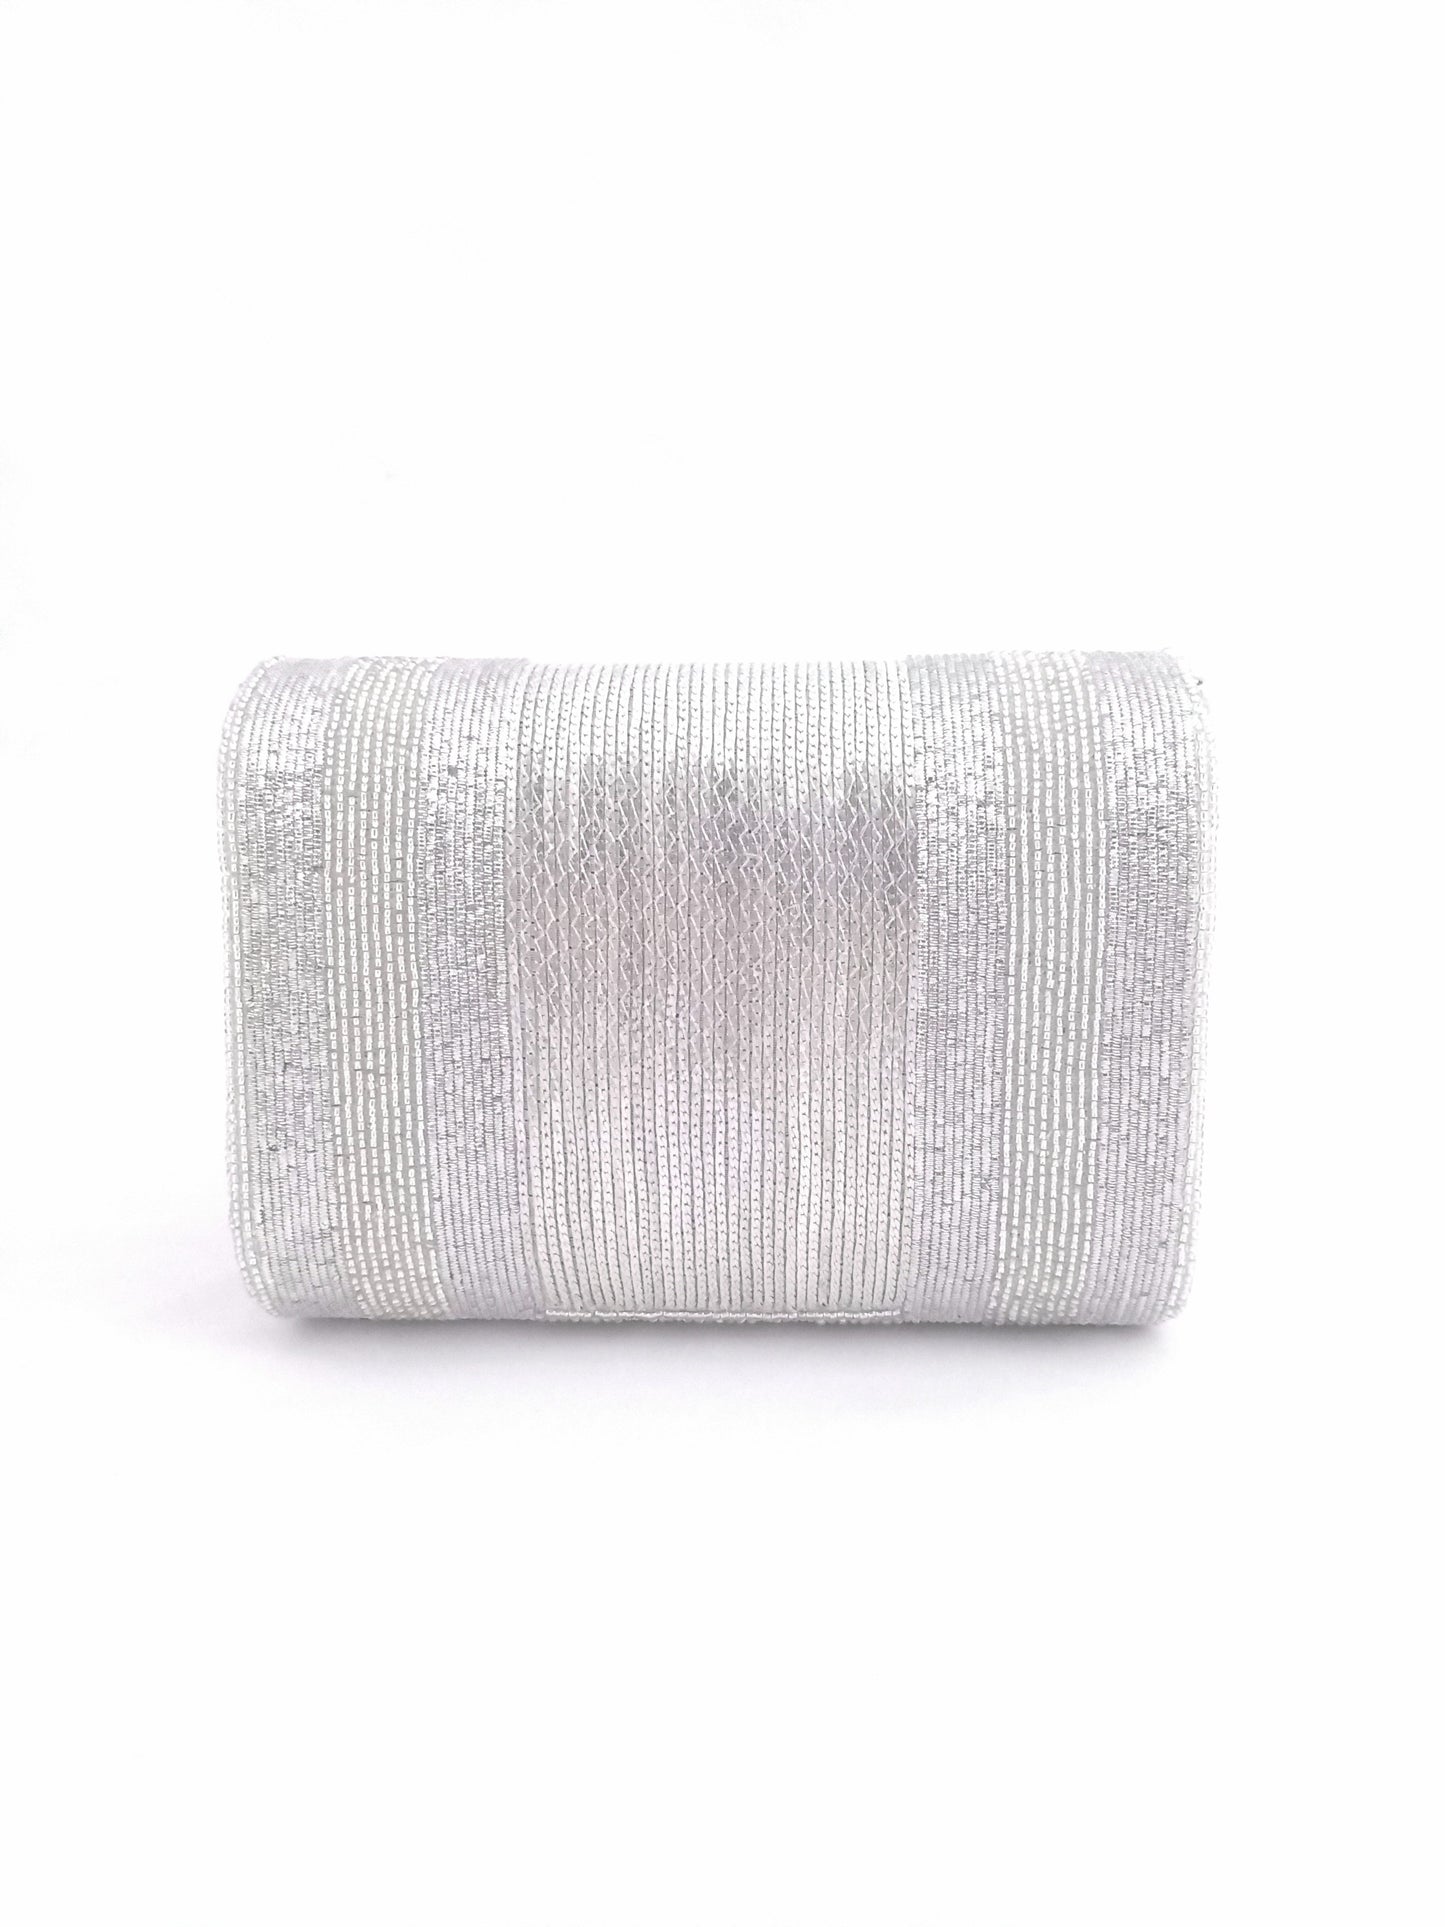 White Brass Flap Over Hand Embroidered Clutch 